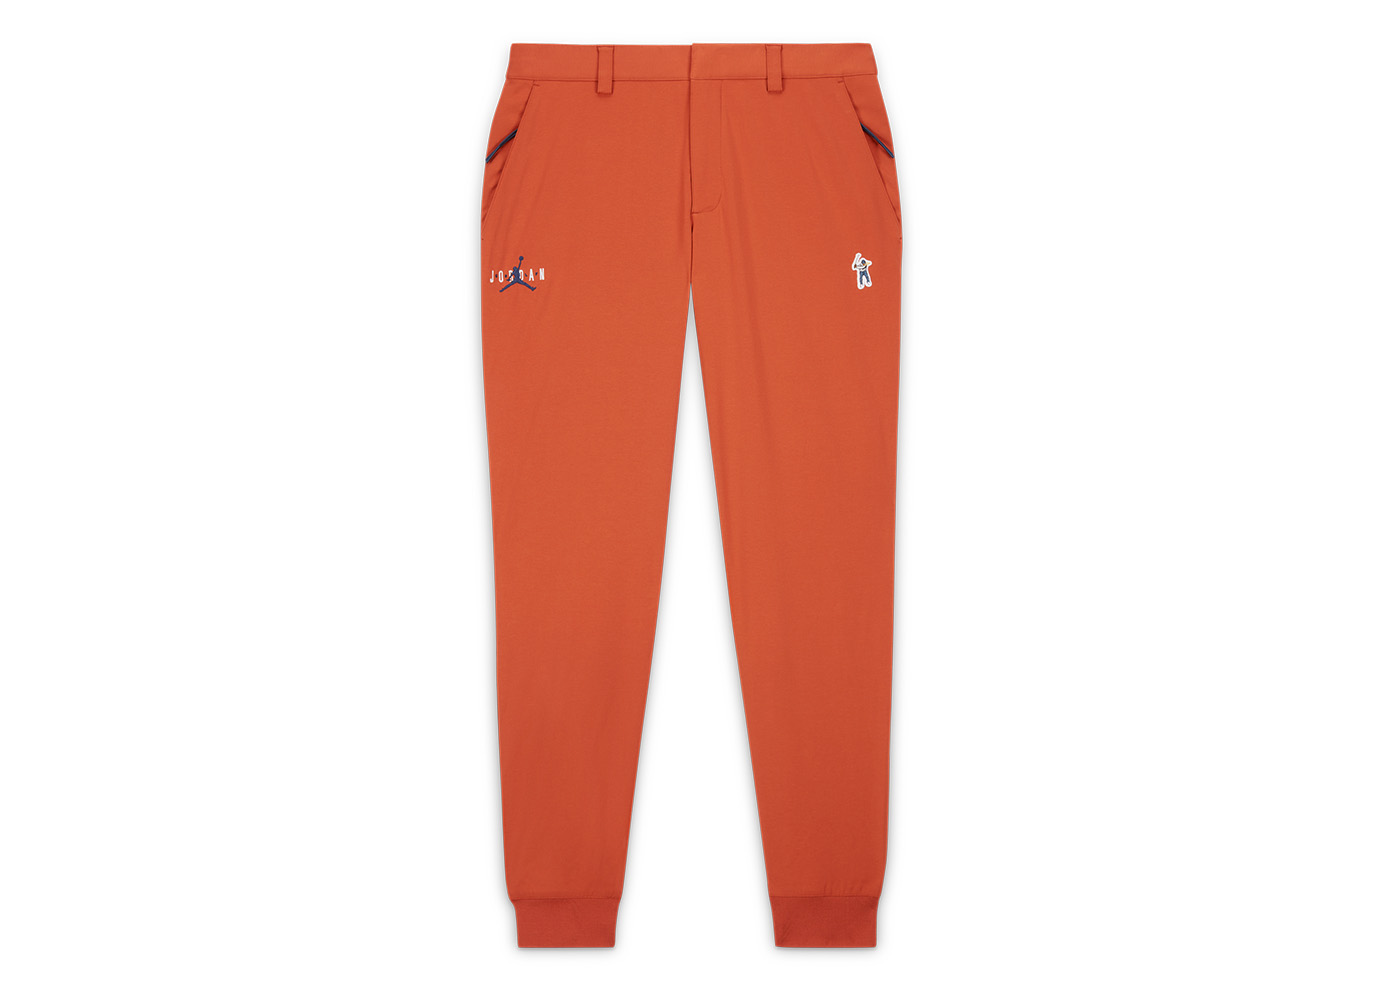 Alberto ROOKIE - 3xDRY Cooler Chino Pants in red buy online - Golf House